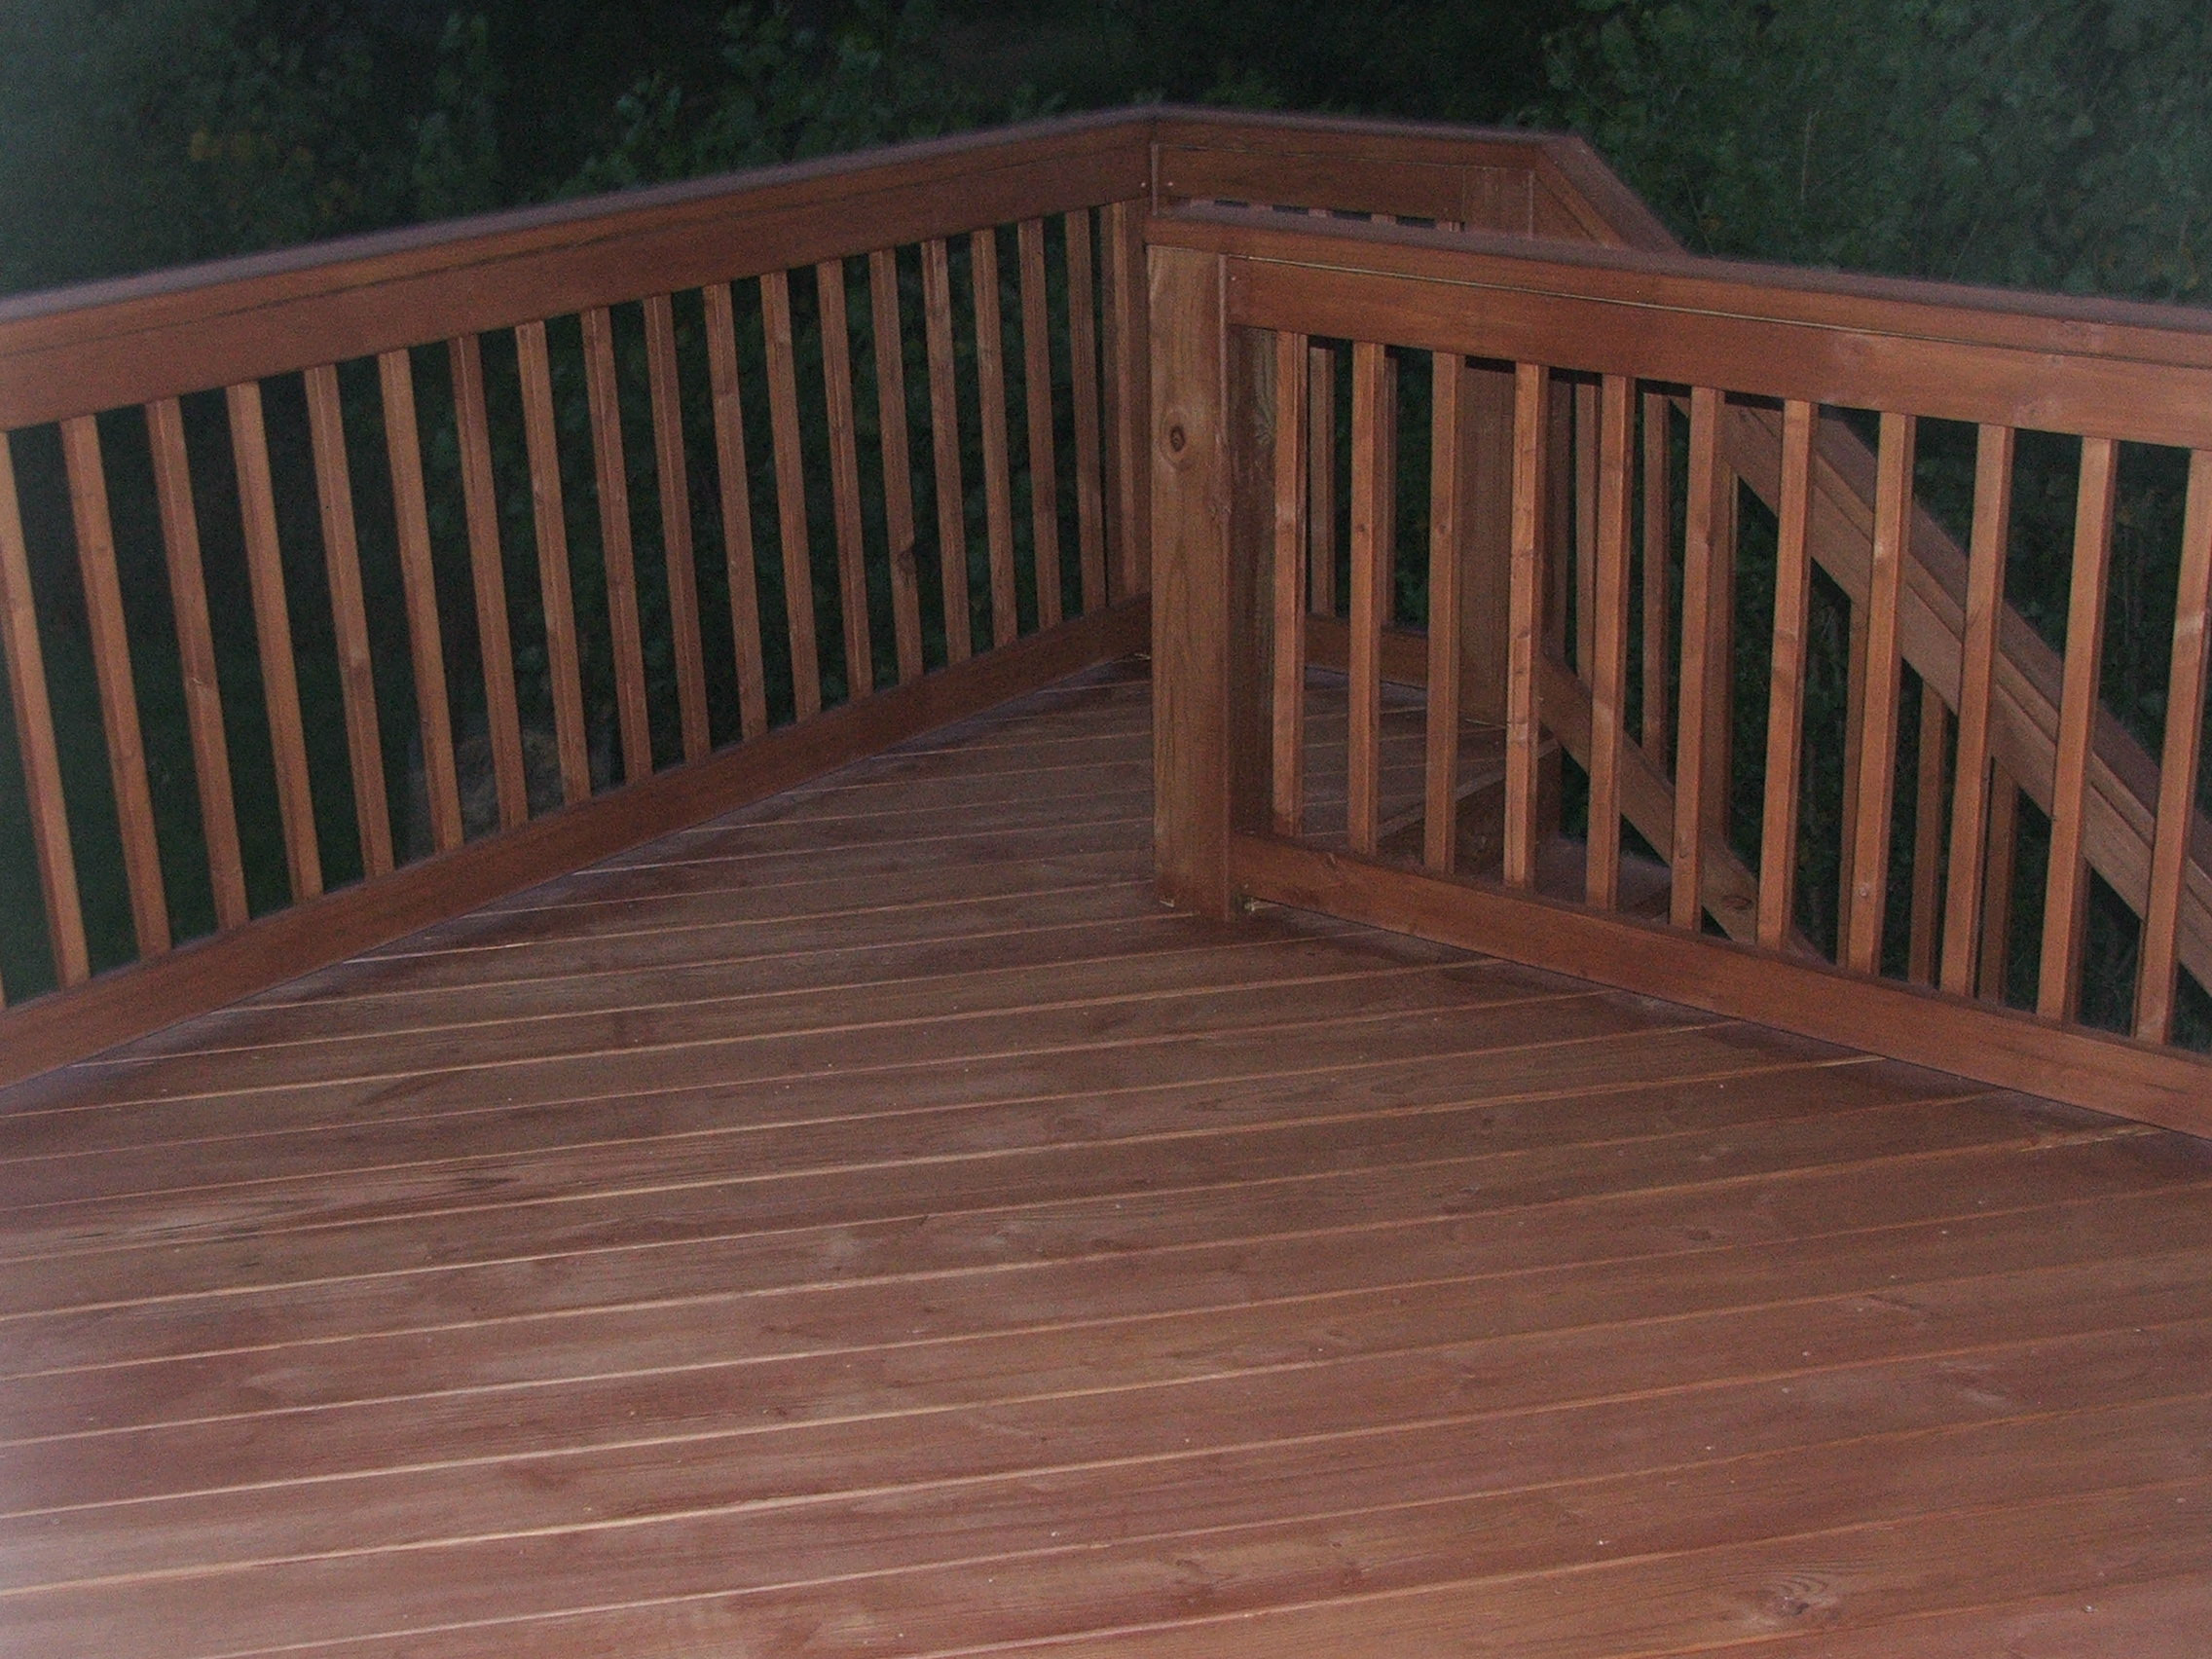 Sherwin Williams Deck Paint
 Deck pleted